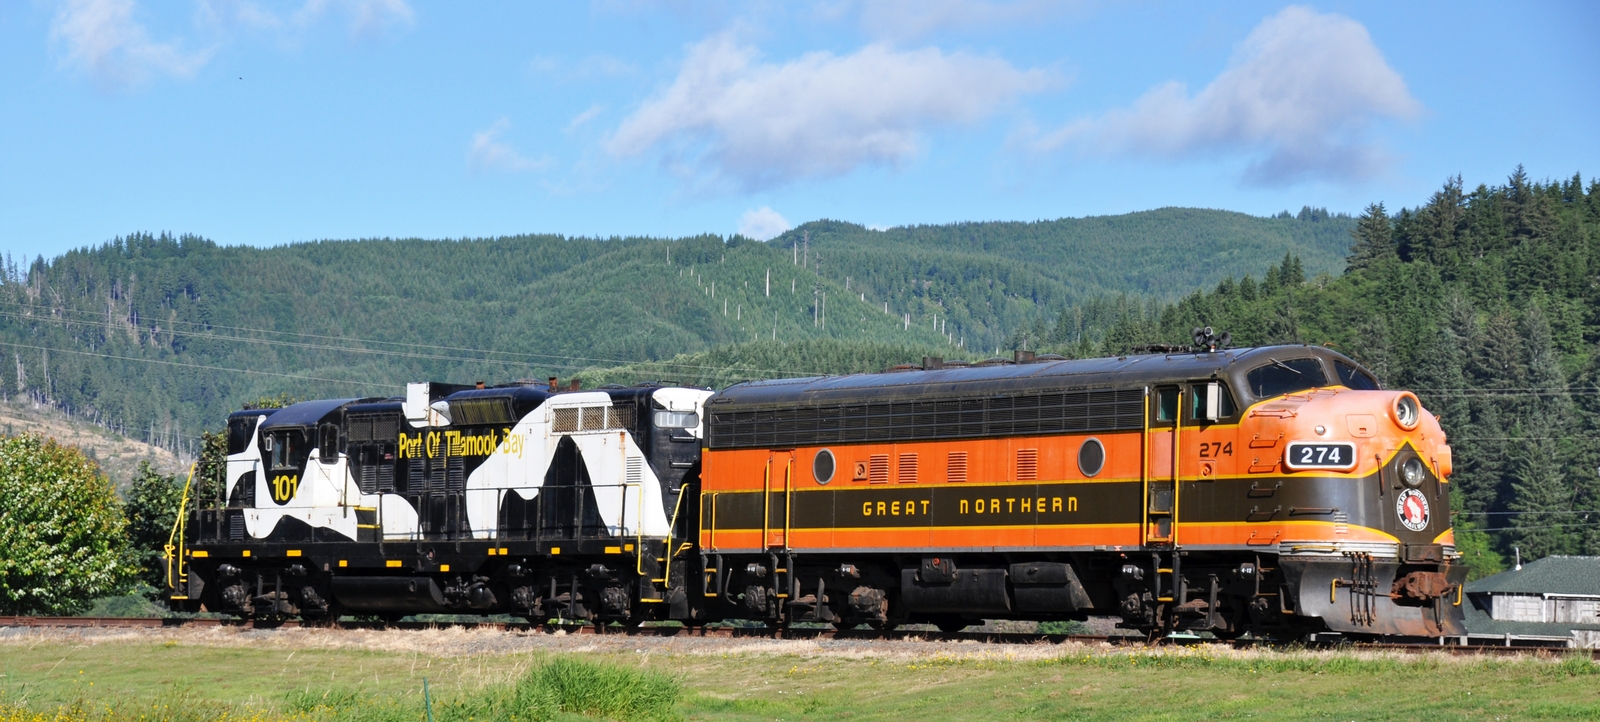 A 1950 F7 (right) and a 1956 GP9 (left), now in the service of the Oregon Coast Scenic Railroad, once again in the livery of their former owners.